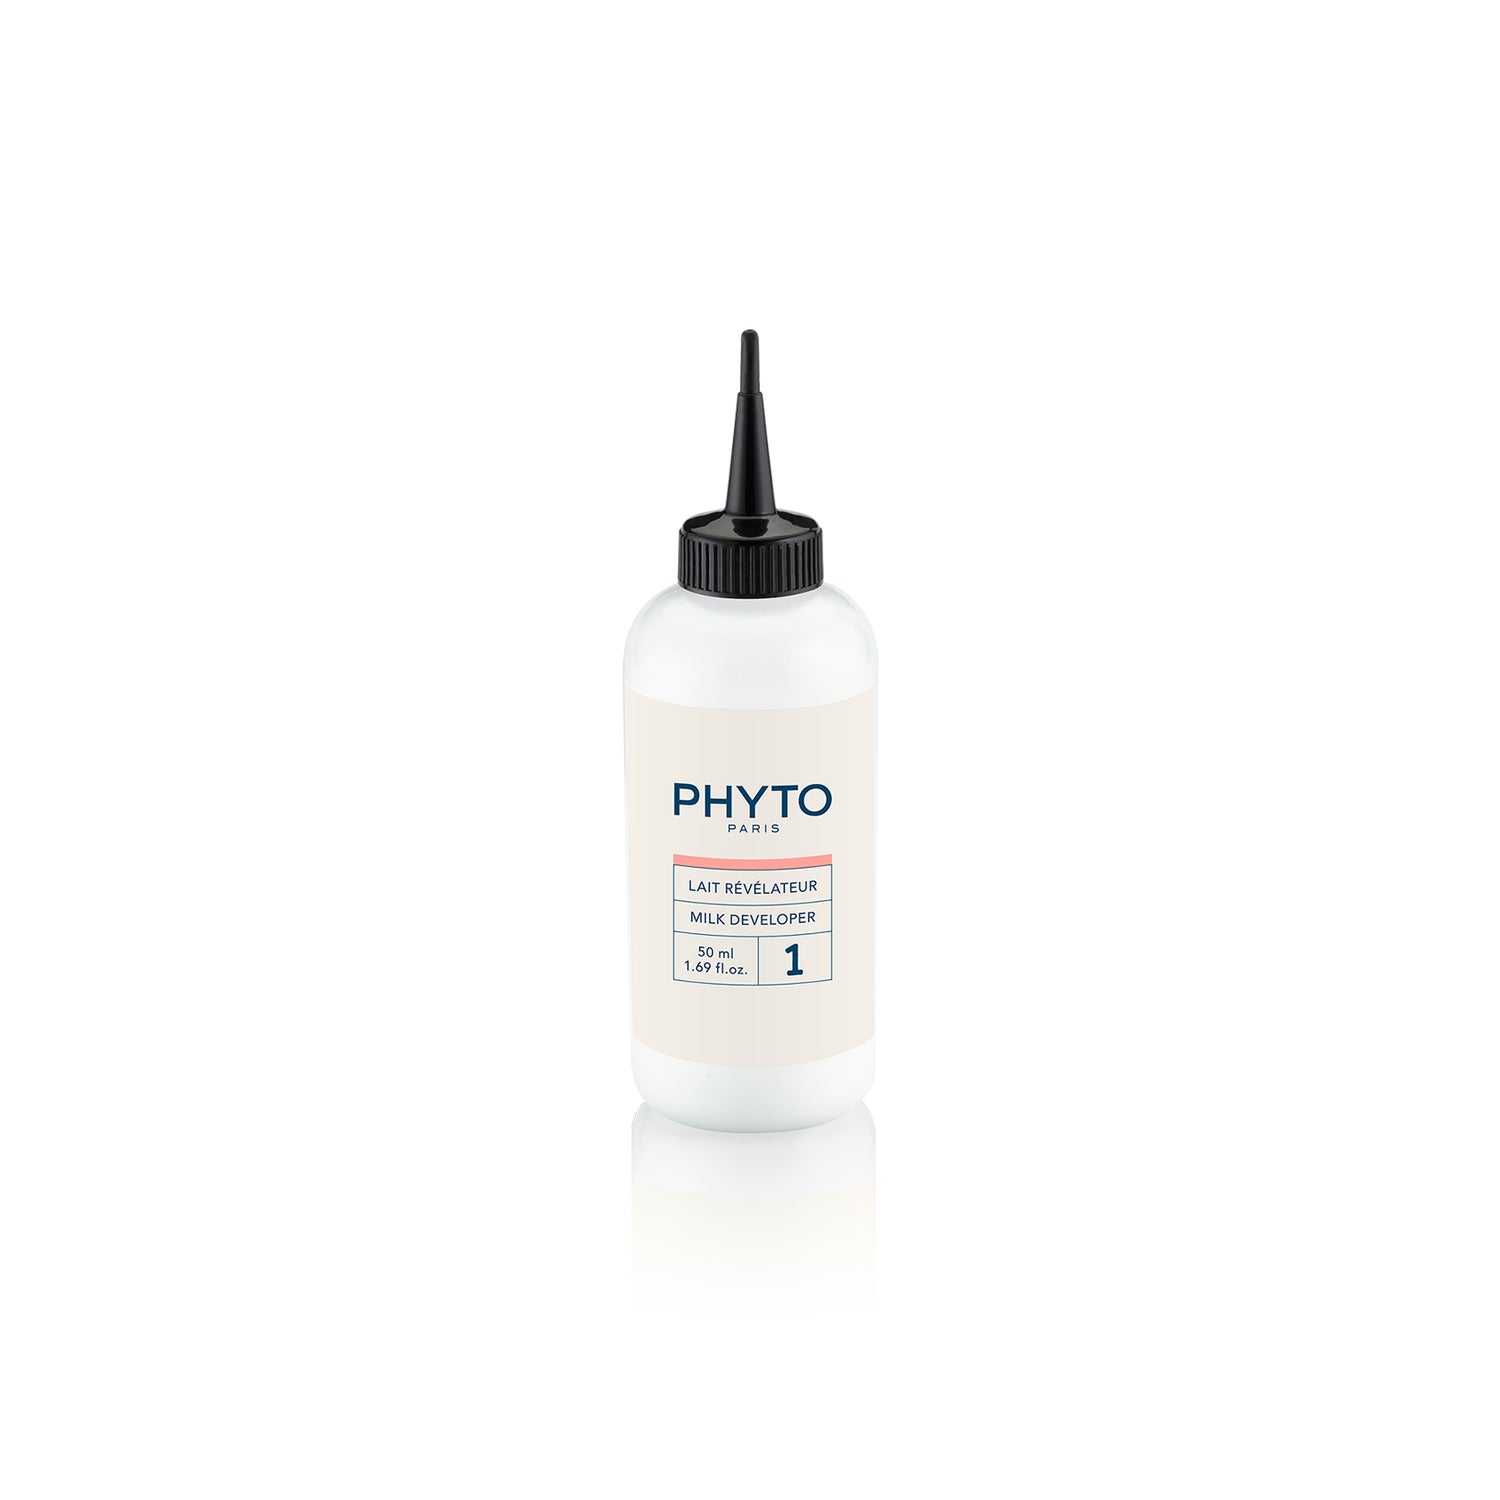 Phytocolor Permanent Color Shade 8 Light Blonde